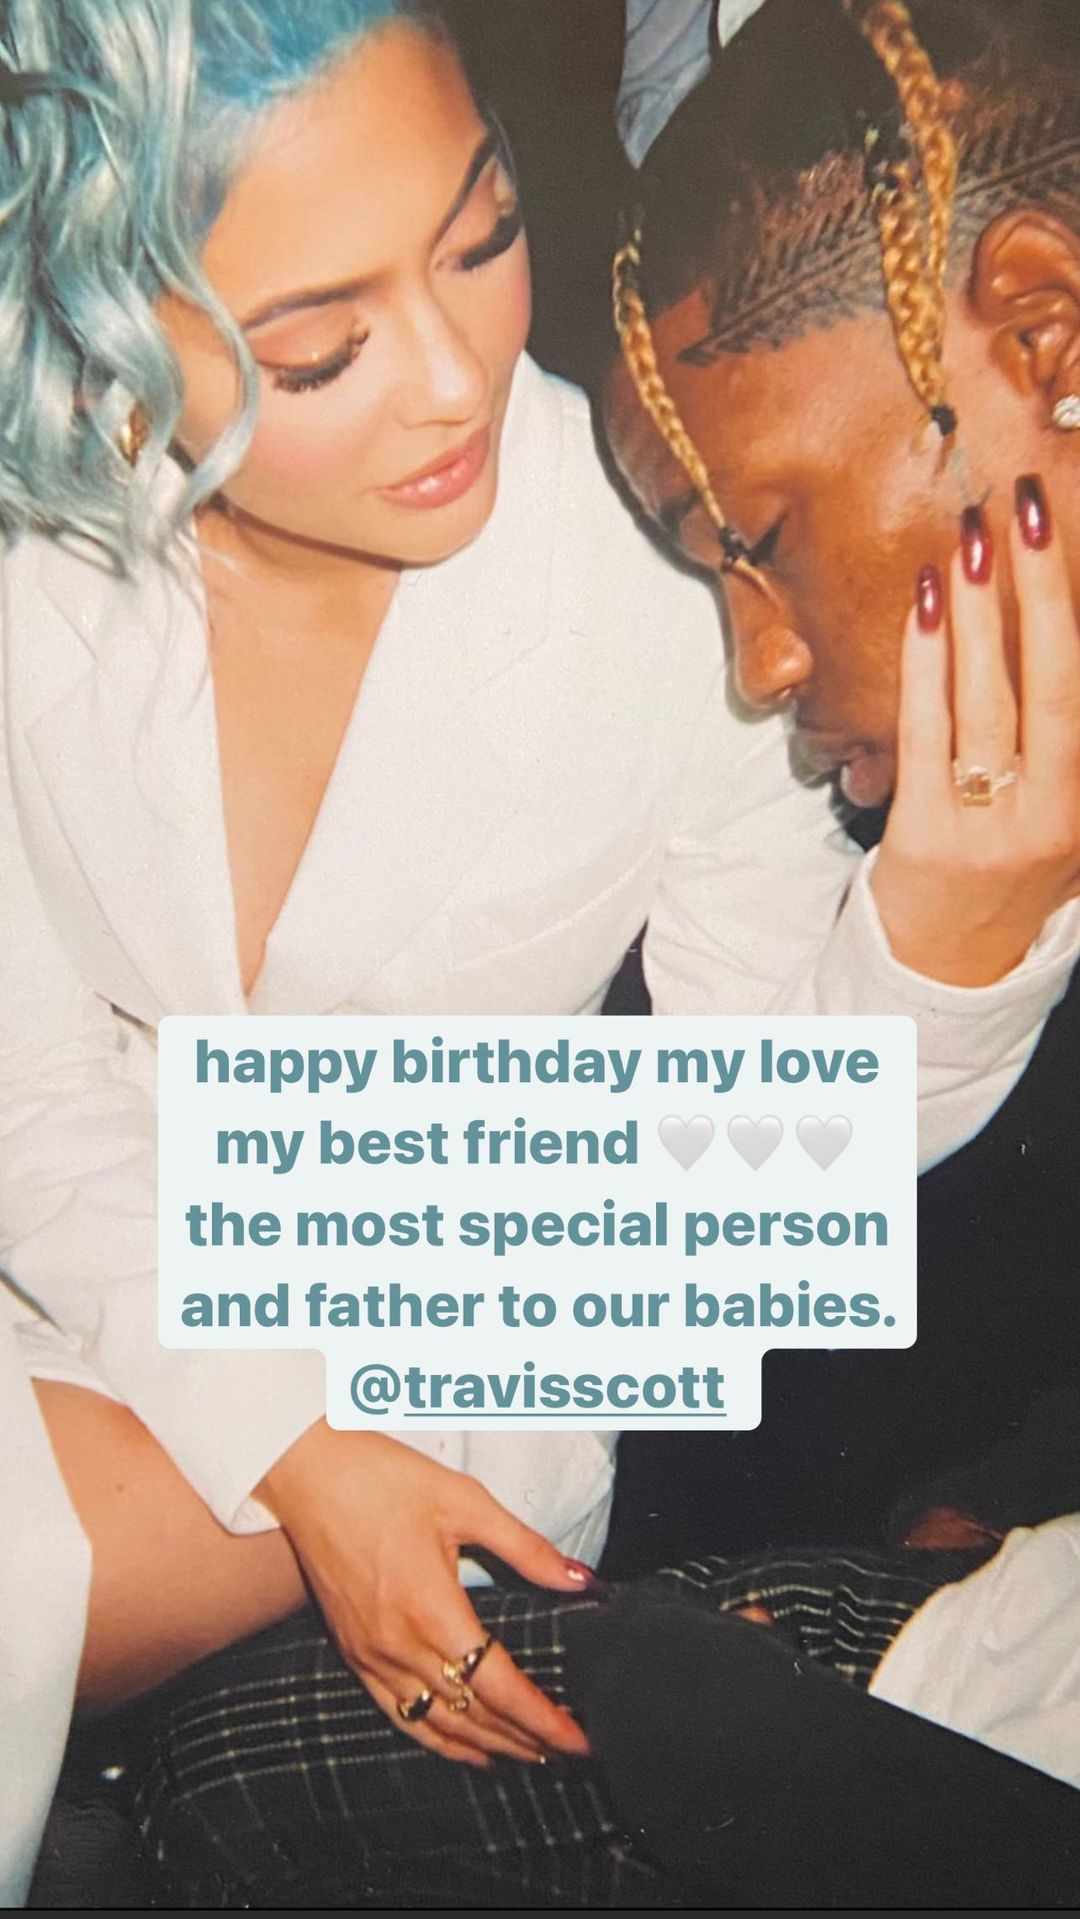 Kylie Jenner Wishes Travis Scott a Happy 31st Birthday: 'The Most Special Person'. https://www.instagram.com/kyliejenner/?hl=en